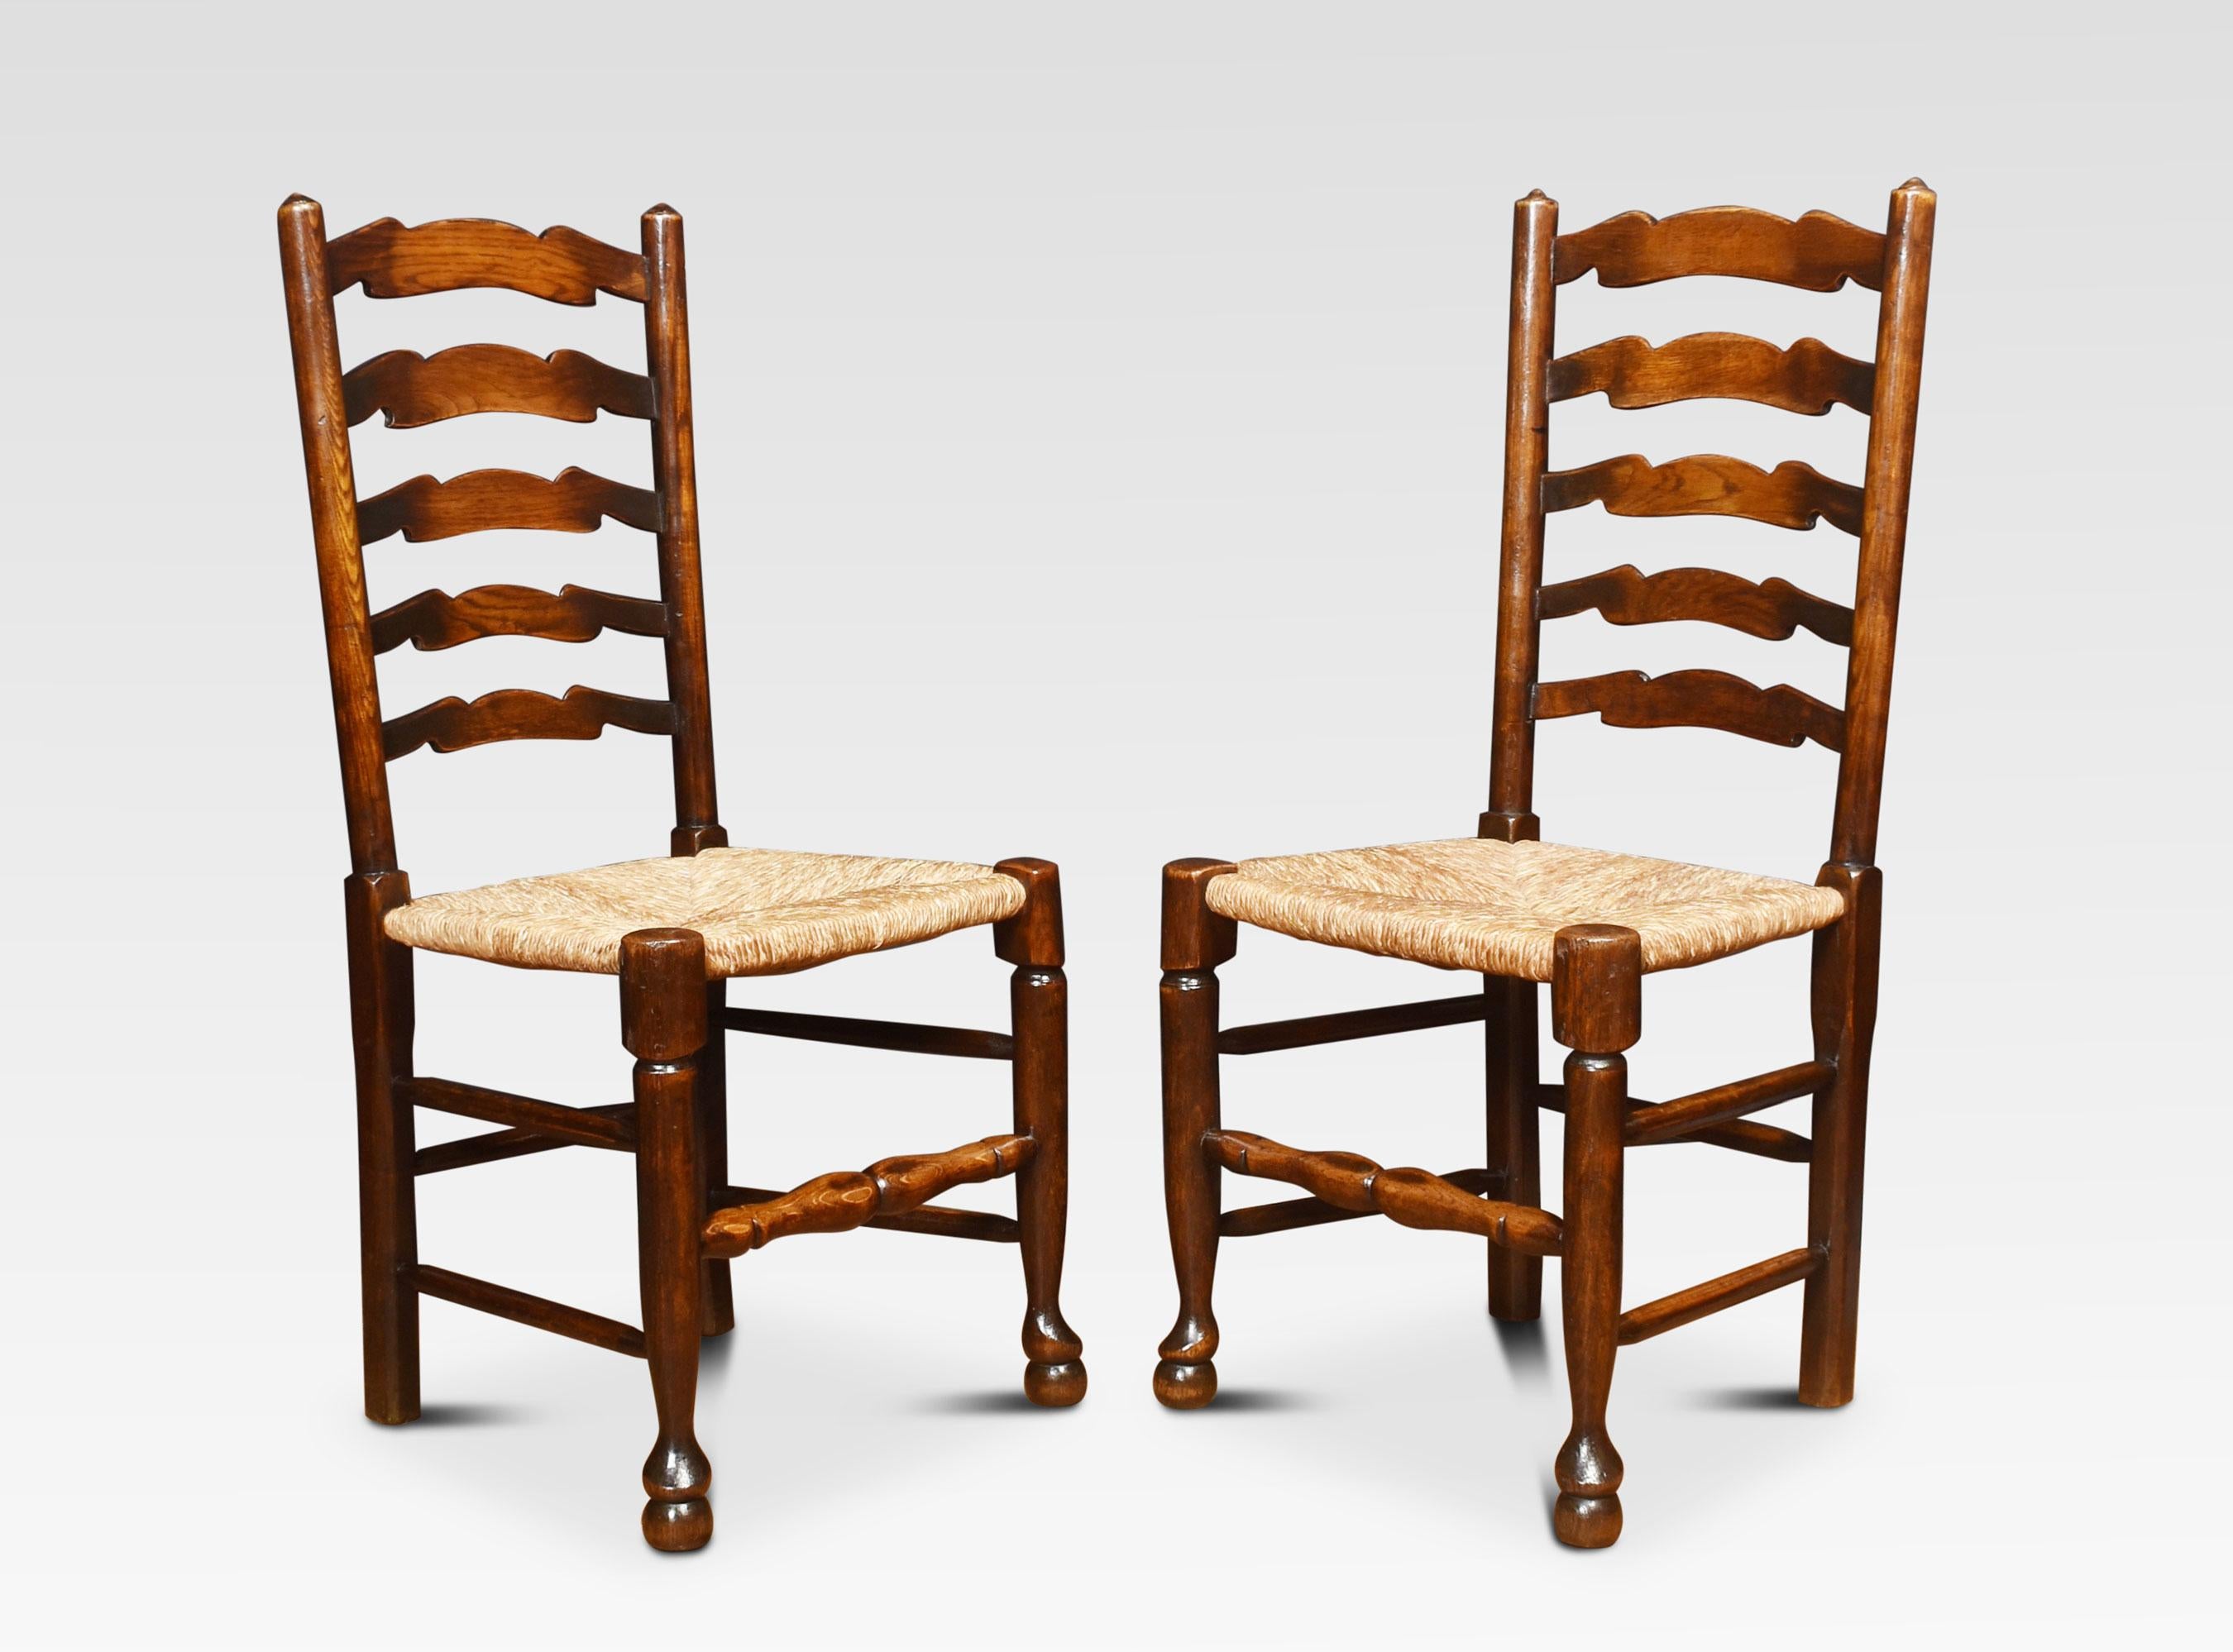 A set of six ladder back oak dining chairs, the ladder backs with rush seats on turned front legs united by stretchers.
Dimensions
Height 39.5 inches height to seat 18 inches
Width 19 inches
Depth 18 inches.